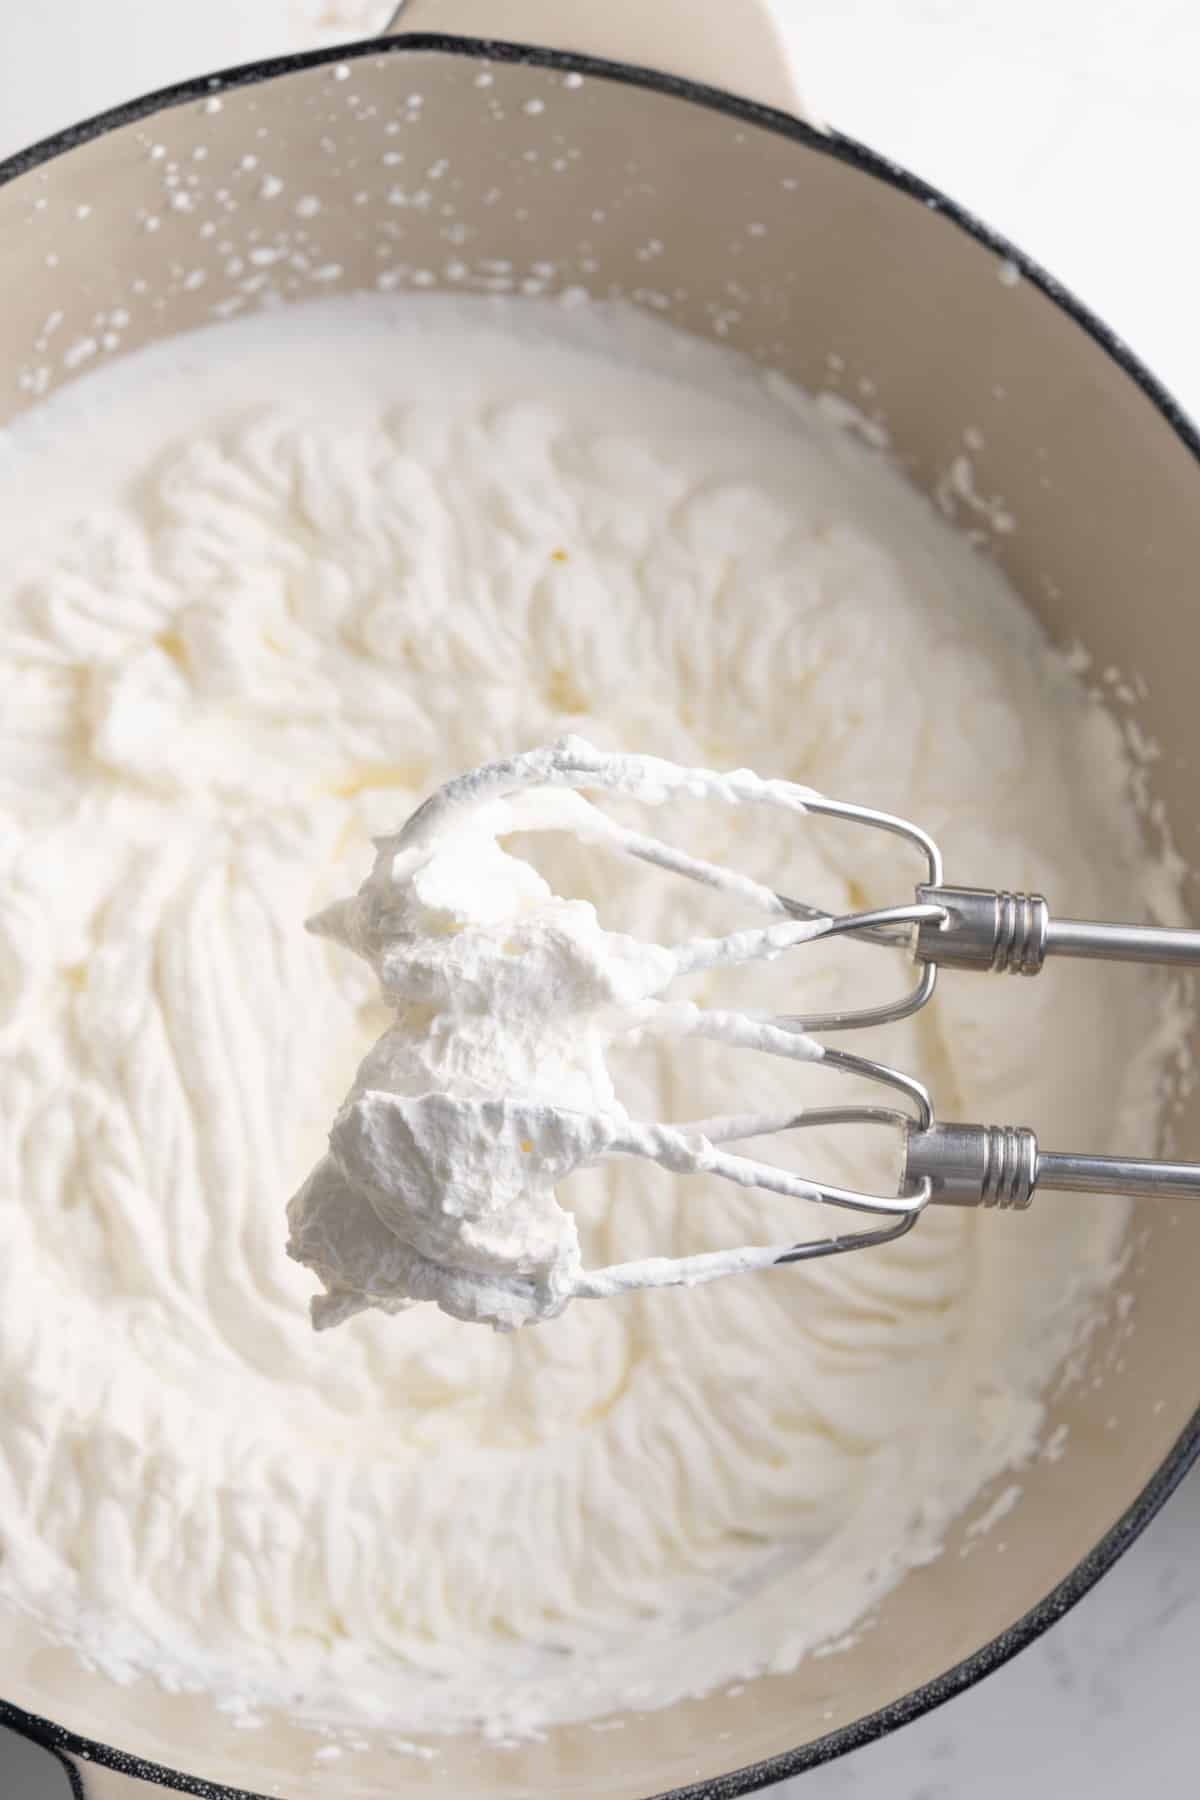 whipped heavy cream on mixture whisk